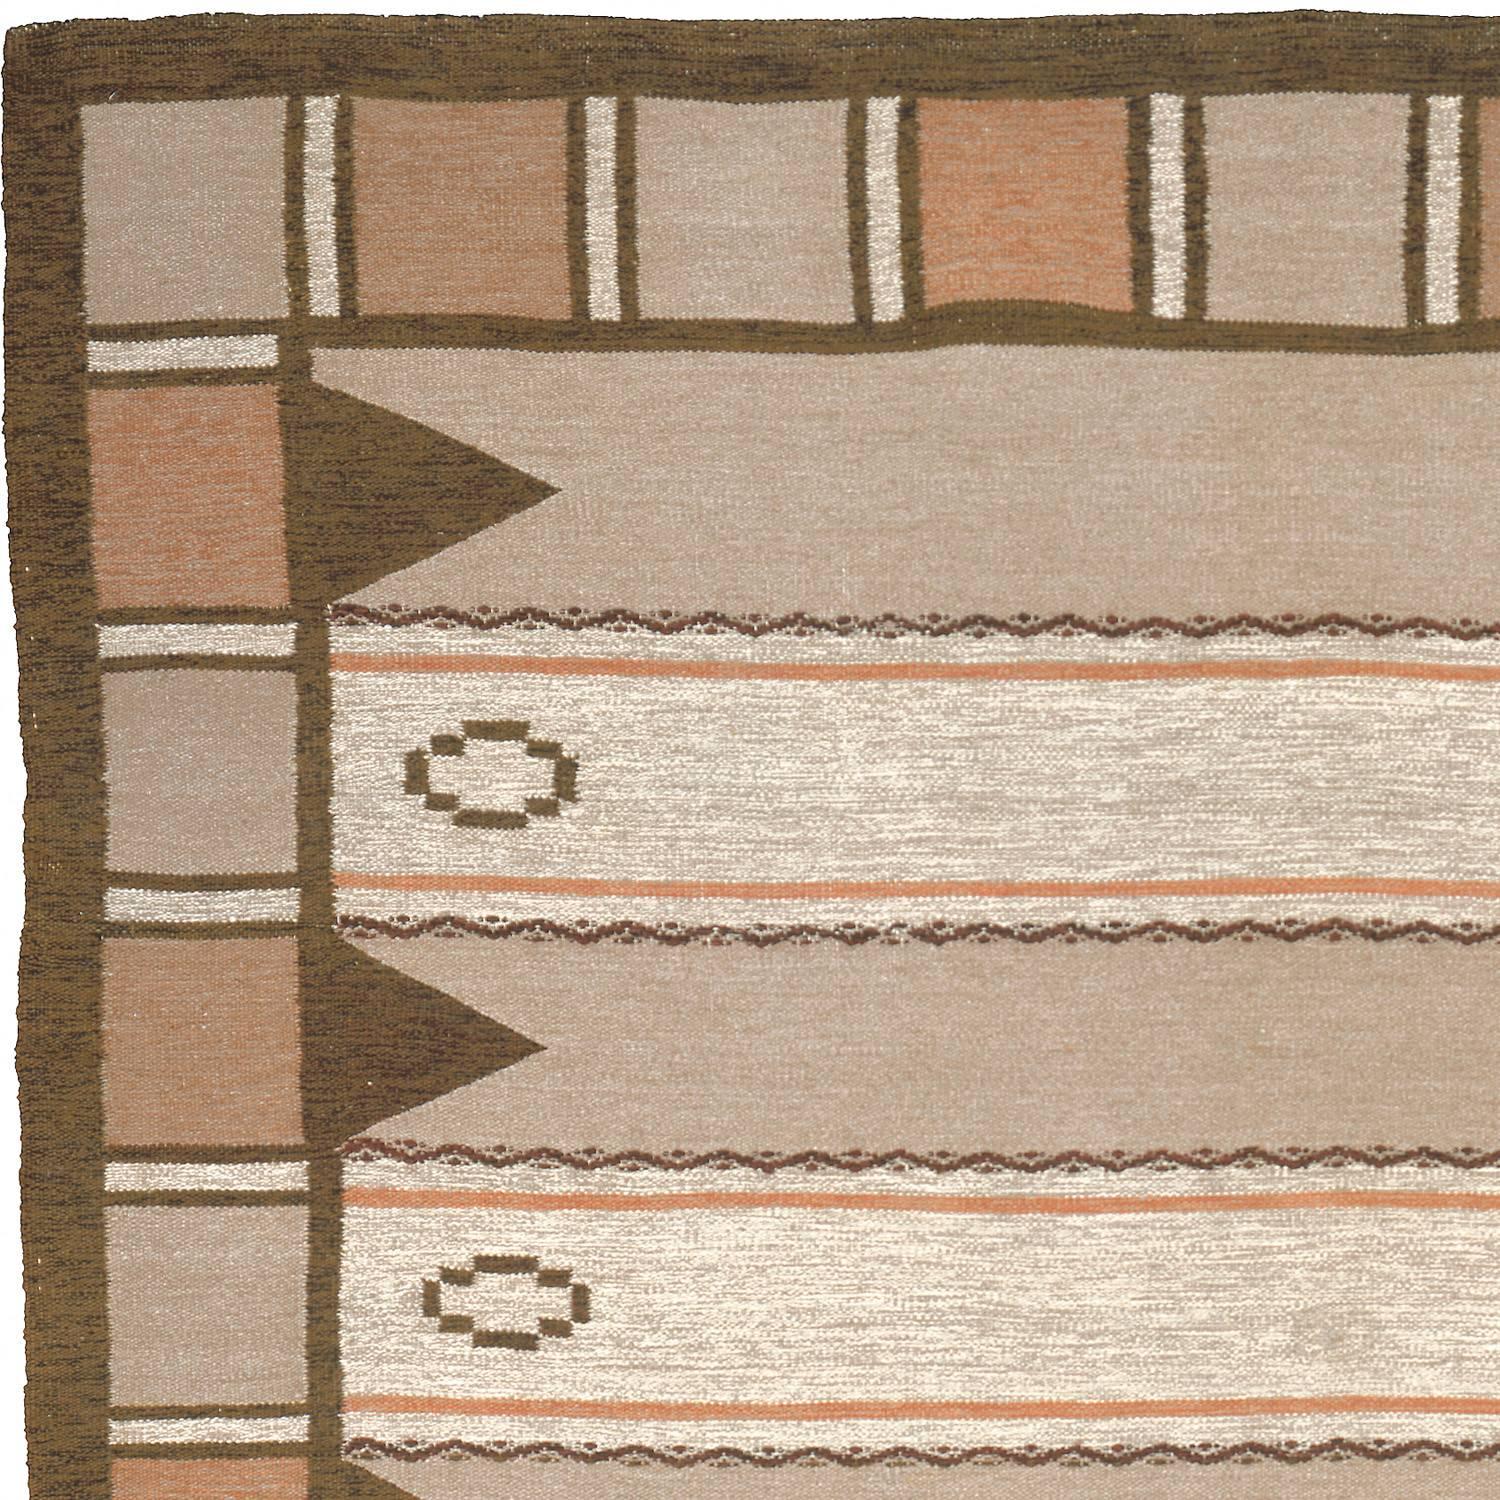 Early 20th Century Swedish Flat-Weave Carpet In Excellent Condition For Sale In New York, NY